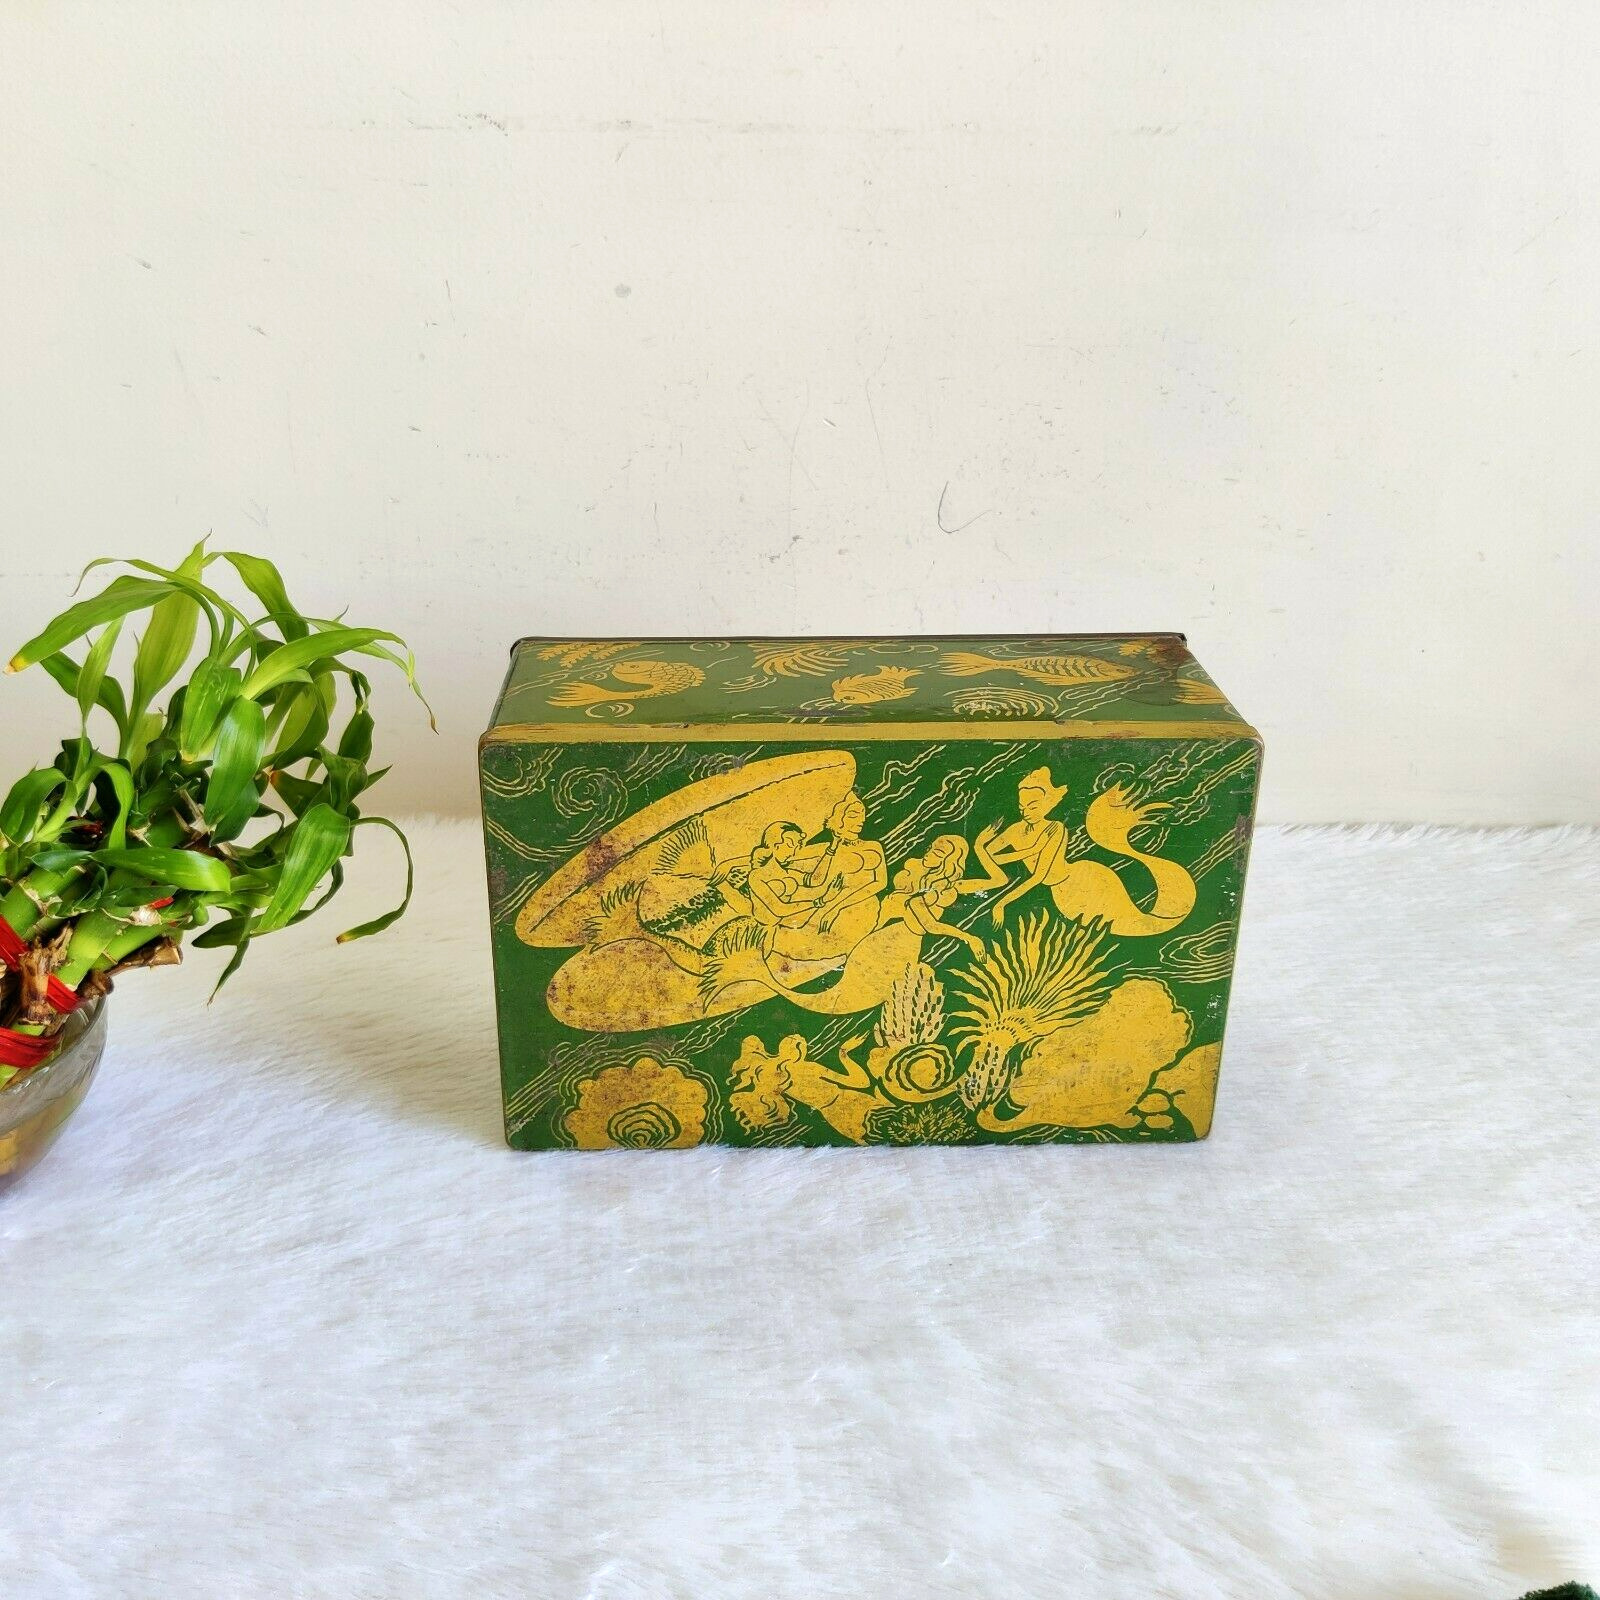 1930s Vintage GG Confectionery Fish Mermaids Graphics Advertising Tin Box TB1377